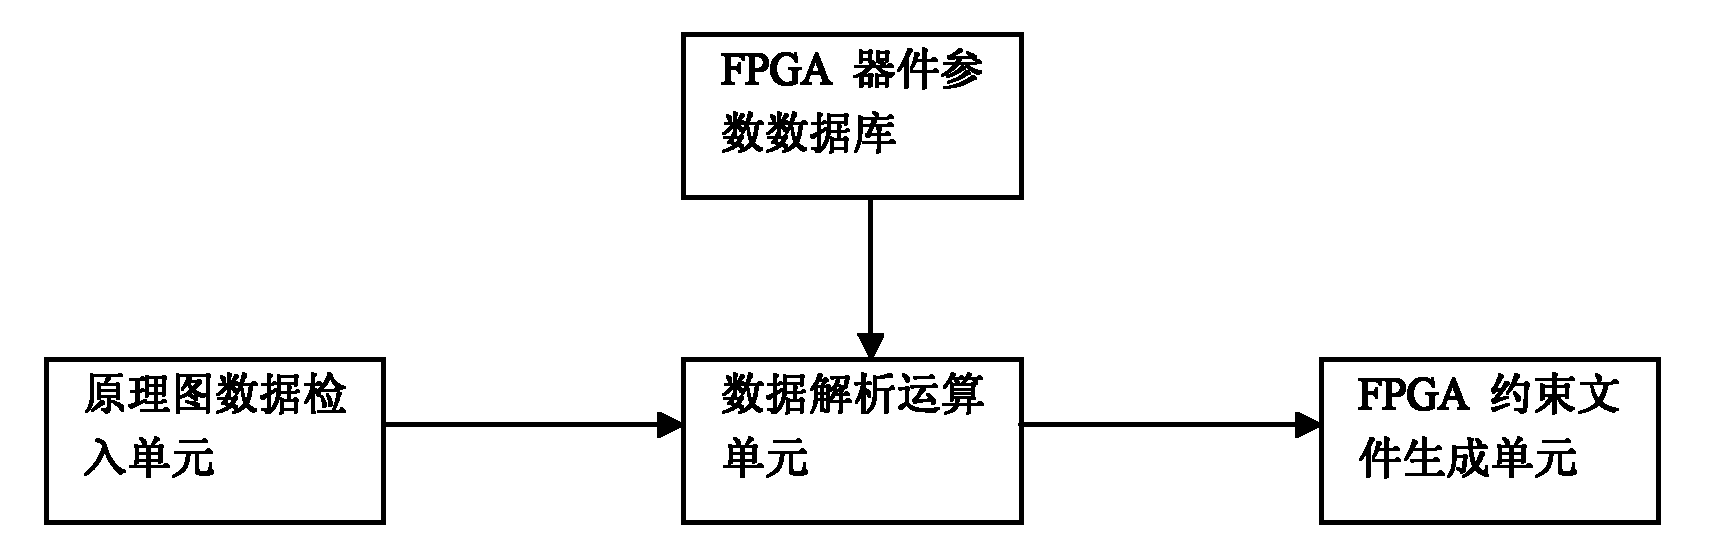 System and method for automatically generating constraint file of field programmable gate array (FPGA)